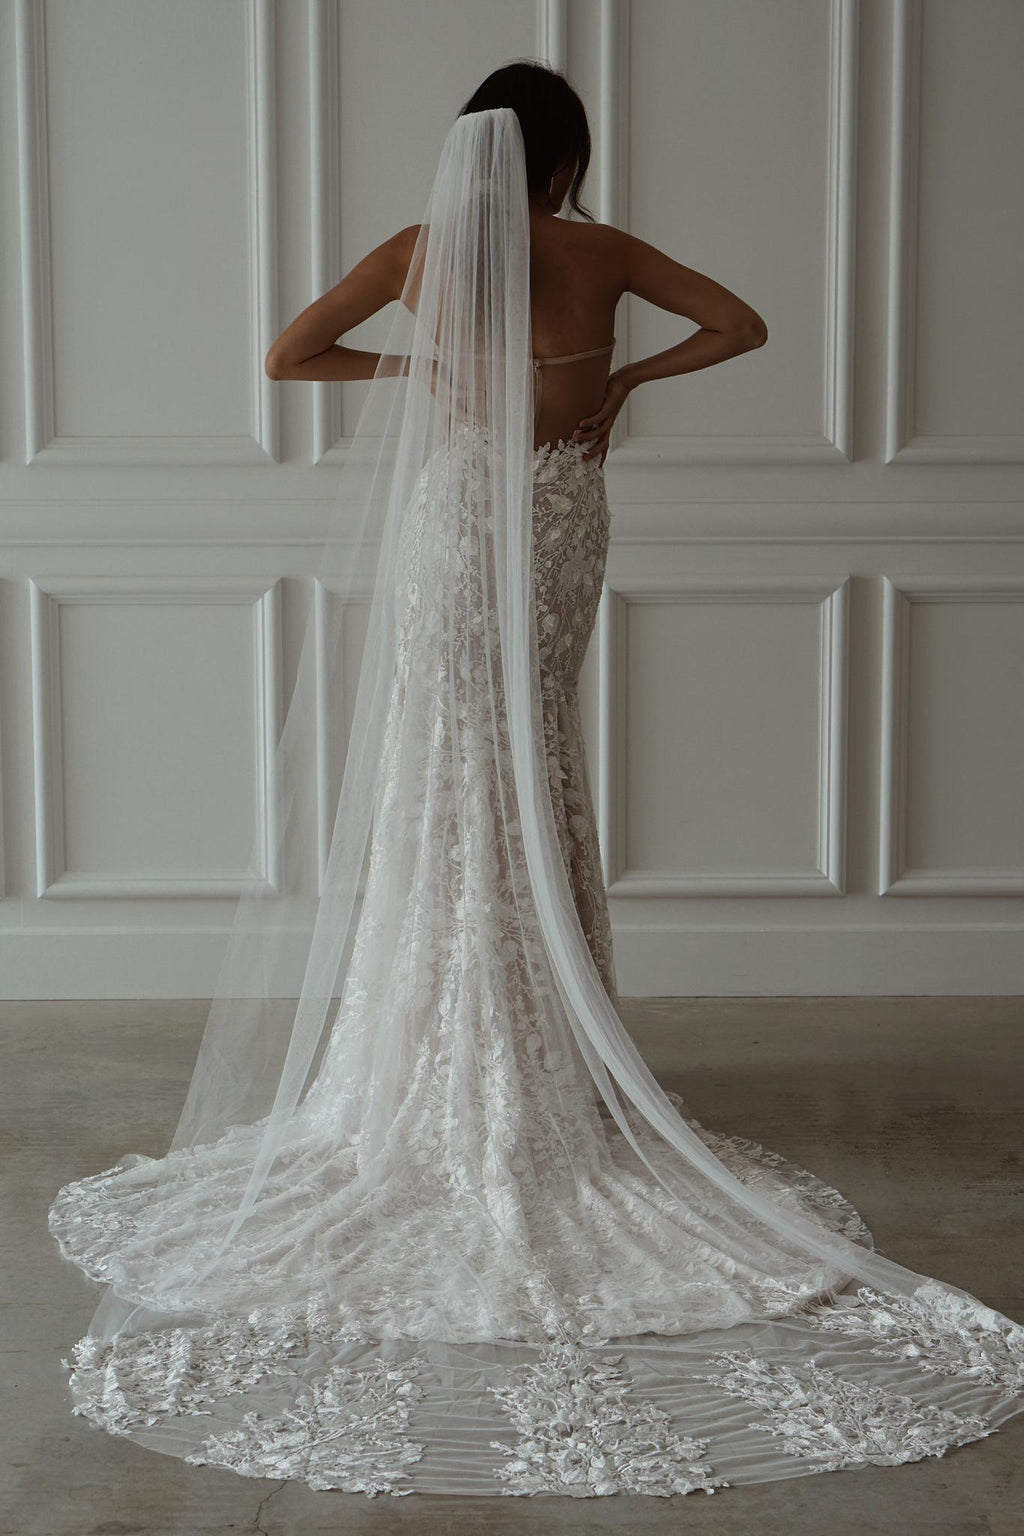 Detachable Tulle Wings : Made With Love, Unique Bridal